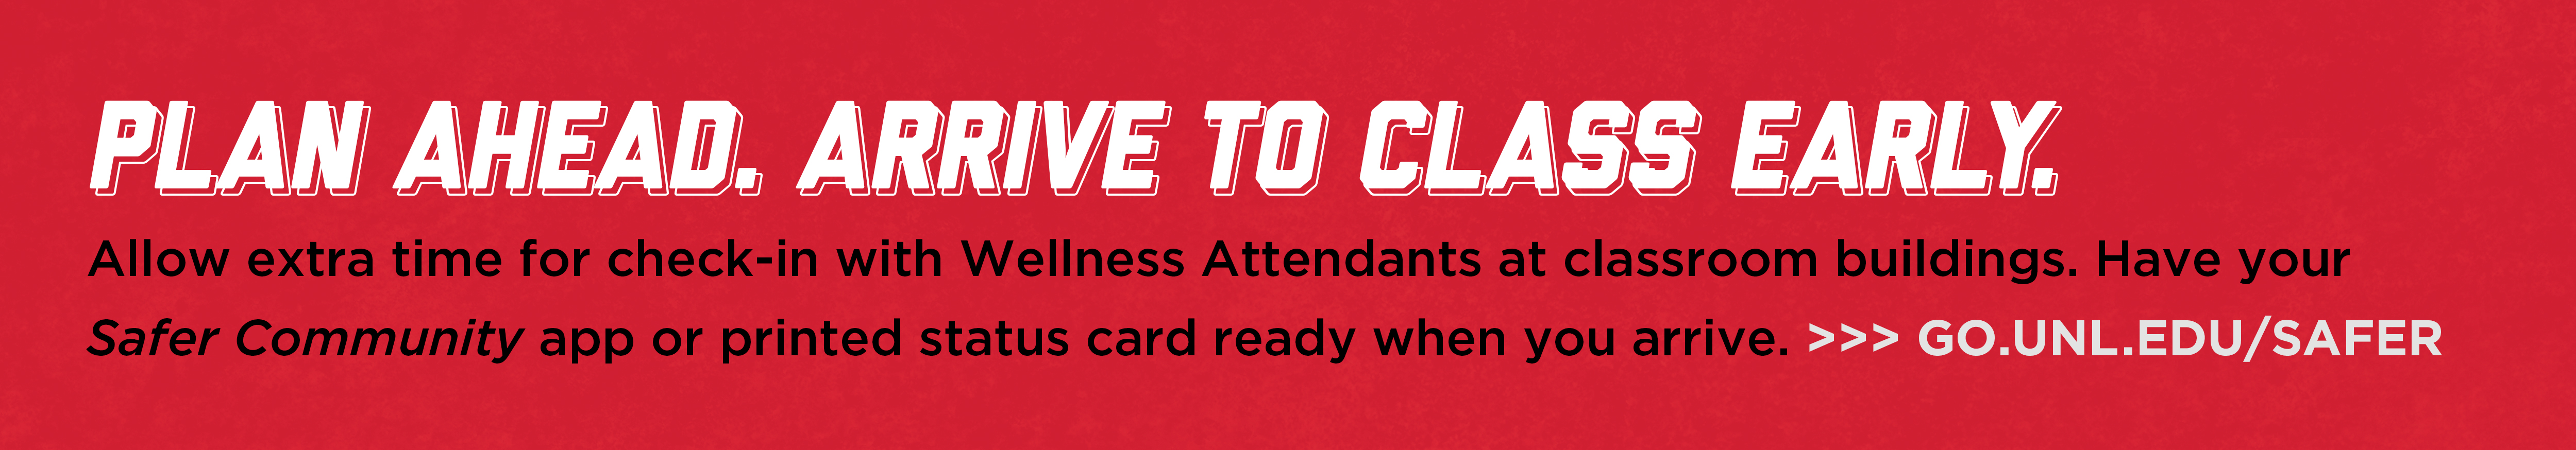 Plan ahead. Arrive to class early. Make sure to allow enough time to pass the Wellness Attendant station without being late to class. Have your phone app or printed status card out and ready.  https://go.unl.edu/safer 